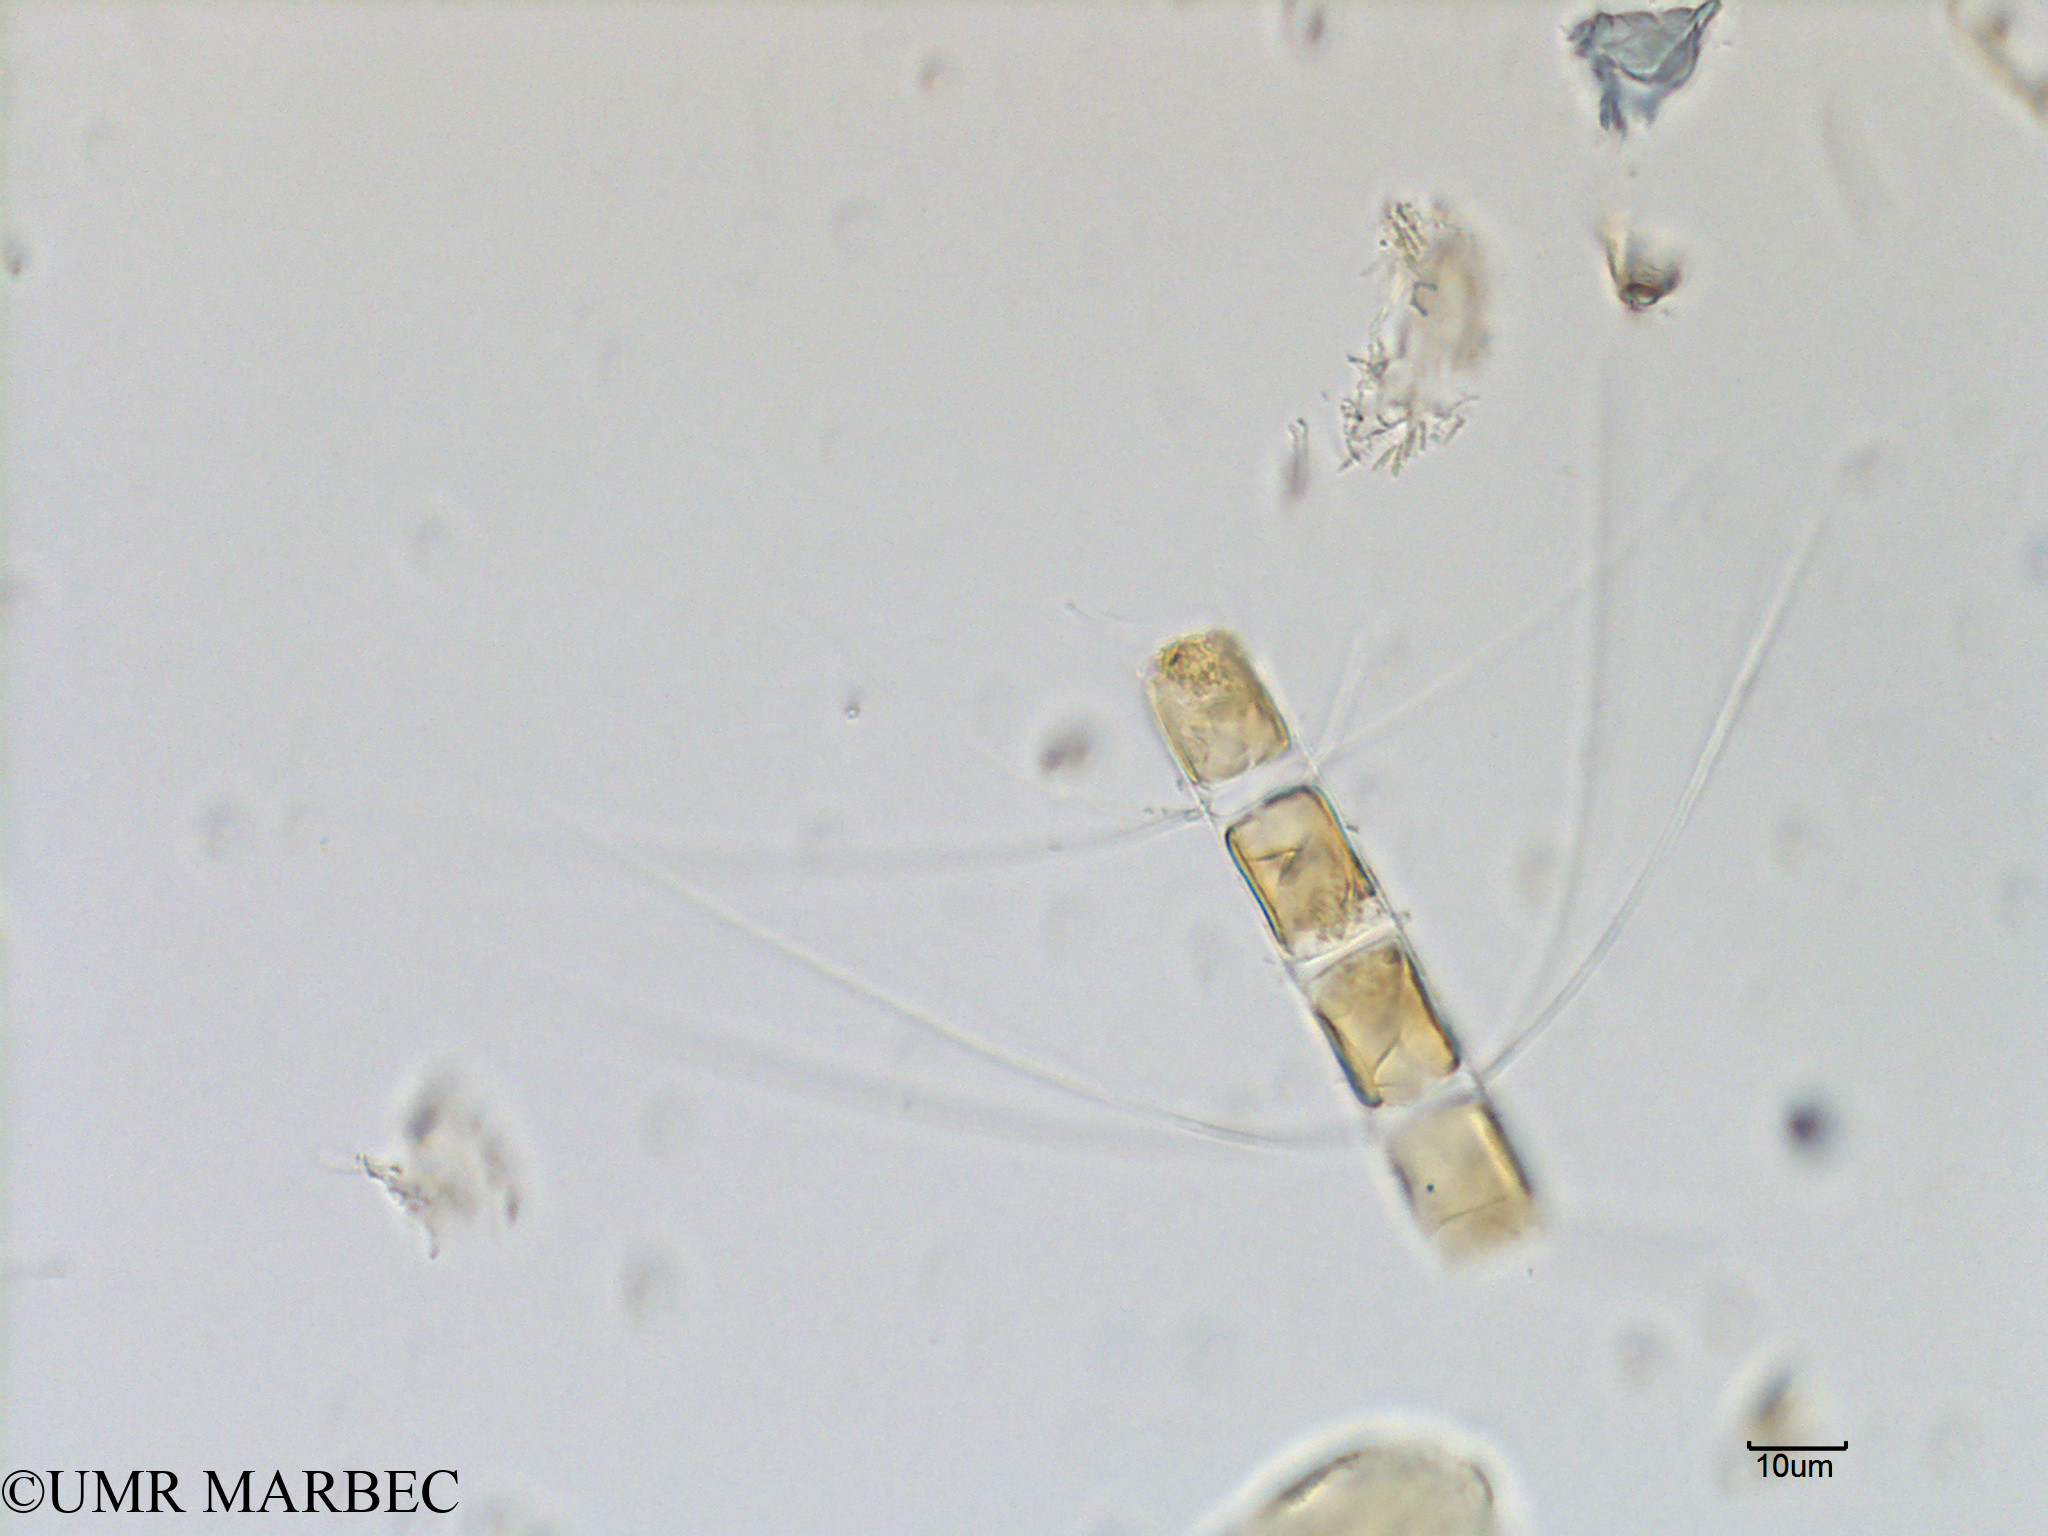 phyto/Scattered_Islands/mayotte_lagoon/SIREME May 2016/Chaetoceros sp34 (MAY5_cf chaetoceros sp -6).tif(copy).jpg